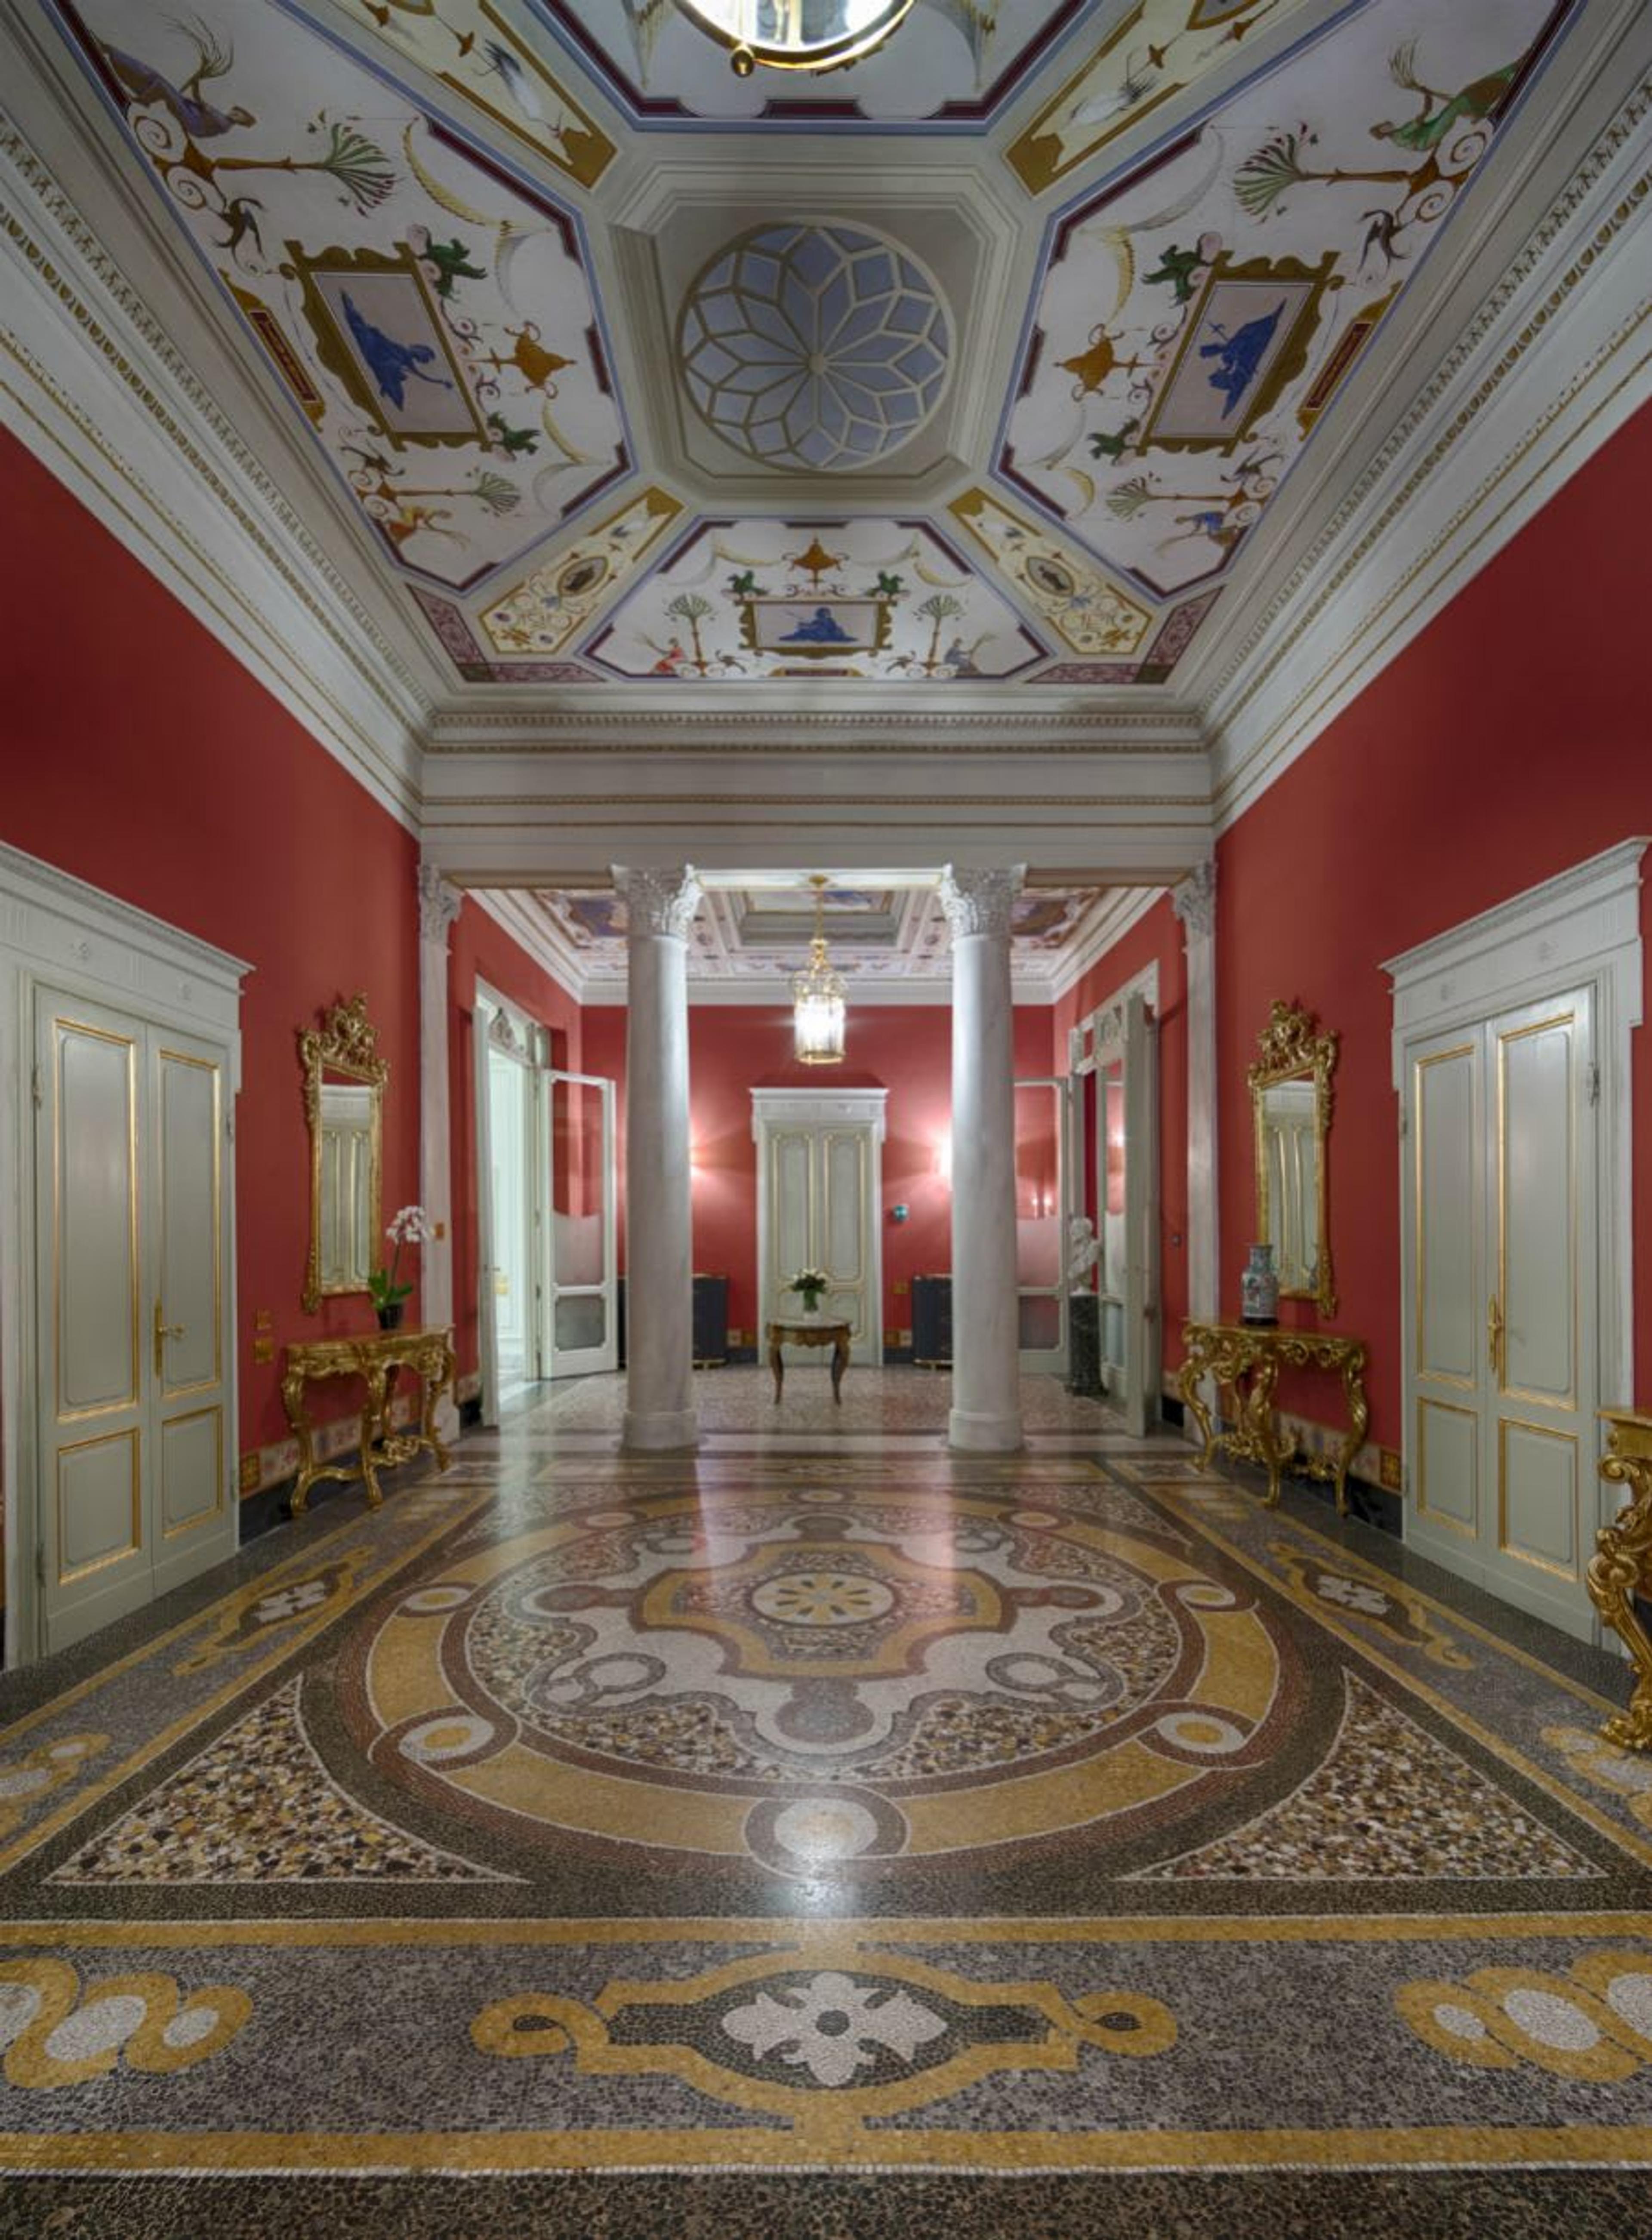 The Regal hall-way of Villa Cora's Nobel Floor where the beautiful Imperial Suite is.